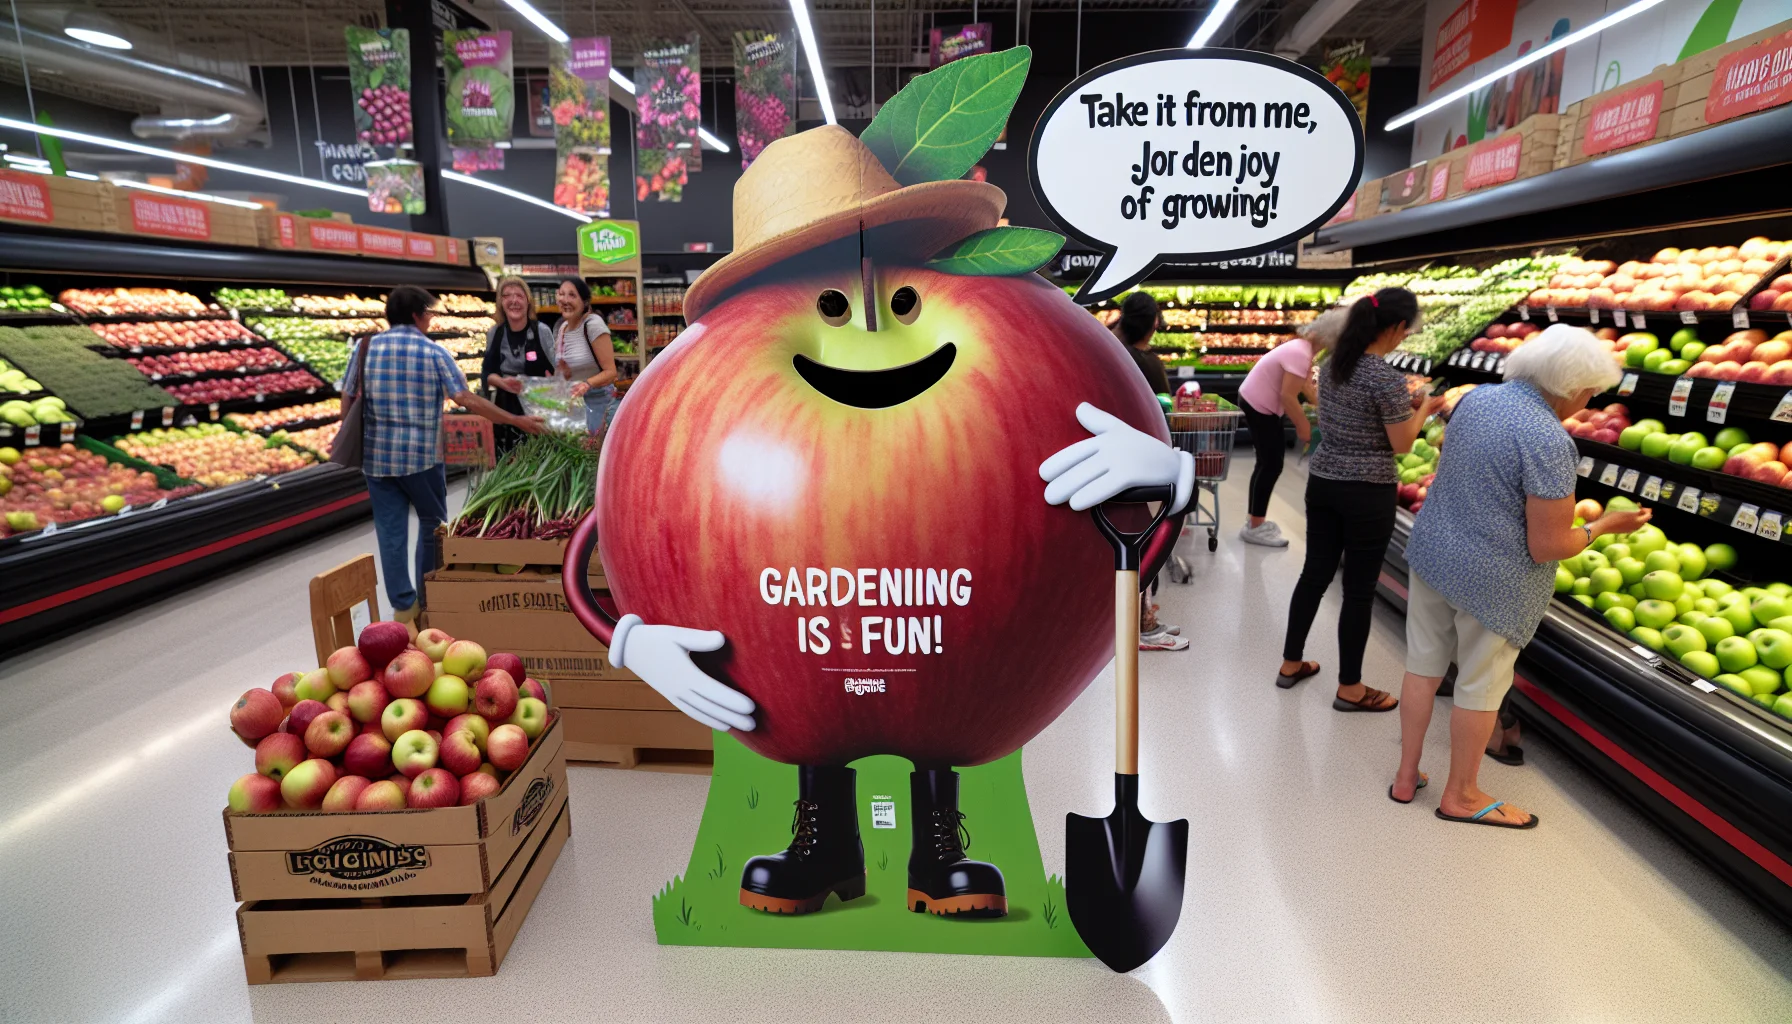 Imagine a humorous scenario set in a grocery store's fresh produce section. Focus primarily on the apple displays. Apples of different varieties and colors are stacked neatly, shining under the store's lights. Now picture a life-sized cutout standee of an apple with arms and legs, donning a gardener's hat, gloves, and a small shovel playfully hanging at its side. It holds a sign saying 'Take it from me, gardening is fun! Join the joy of growing!'. Around the standee, you see customers of diverse genders and descents, all sharing a good laugh and showing interest in gardening.